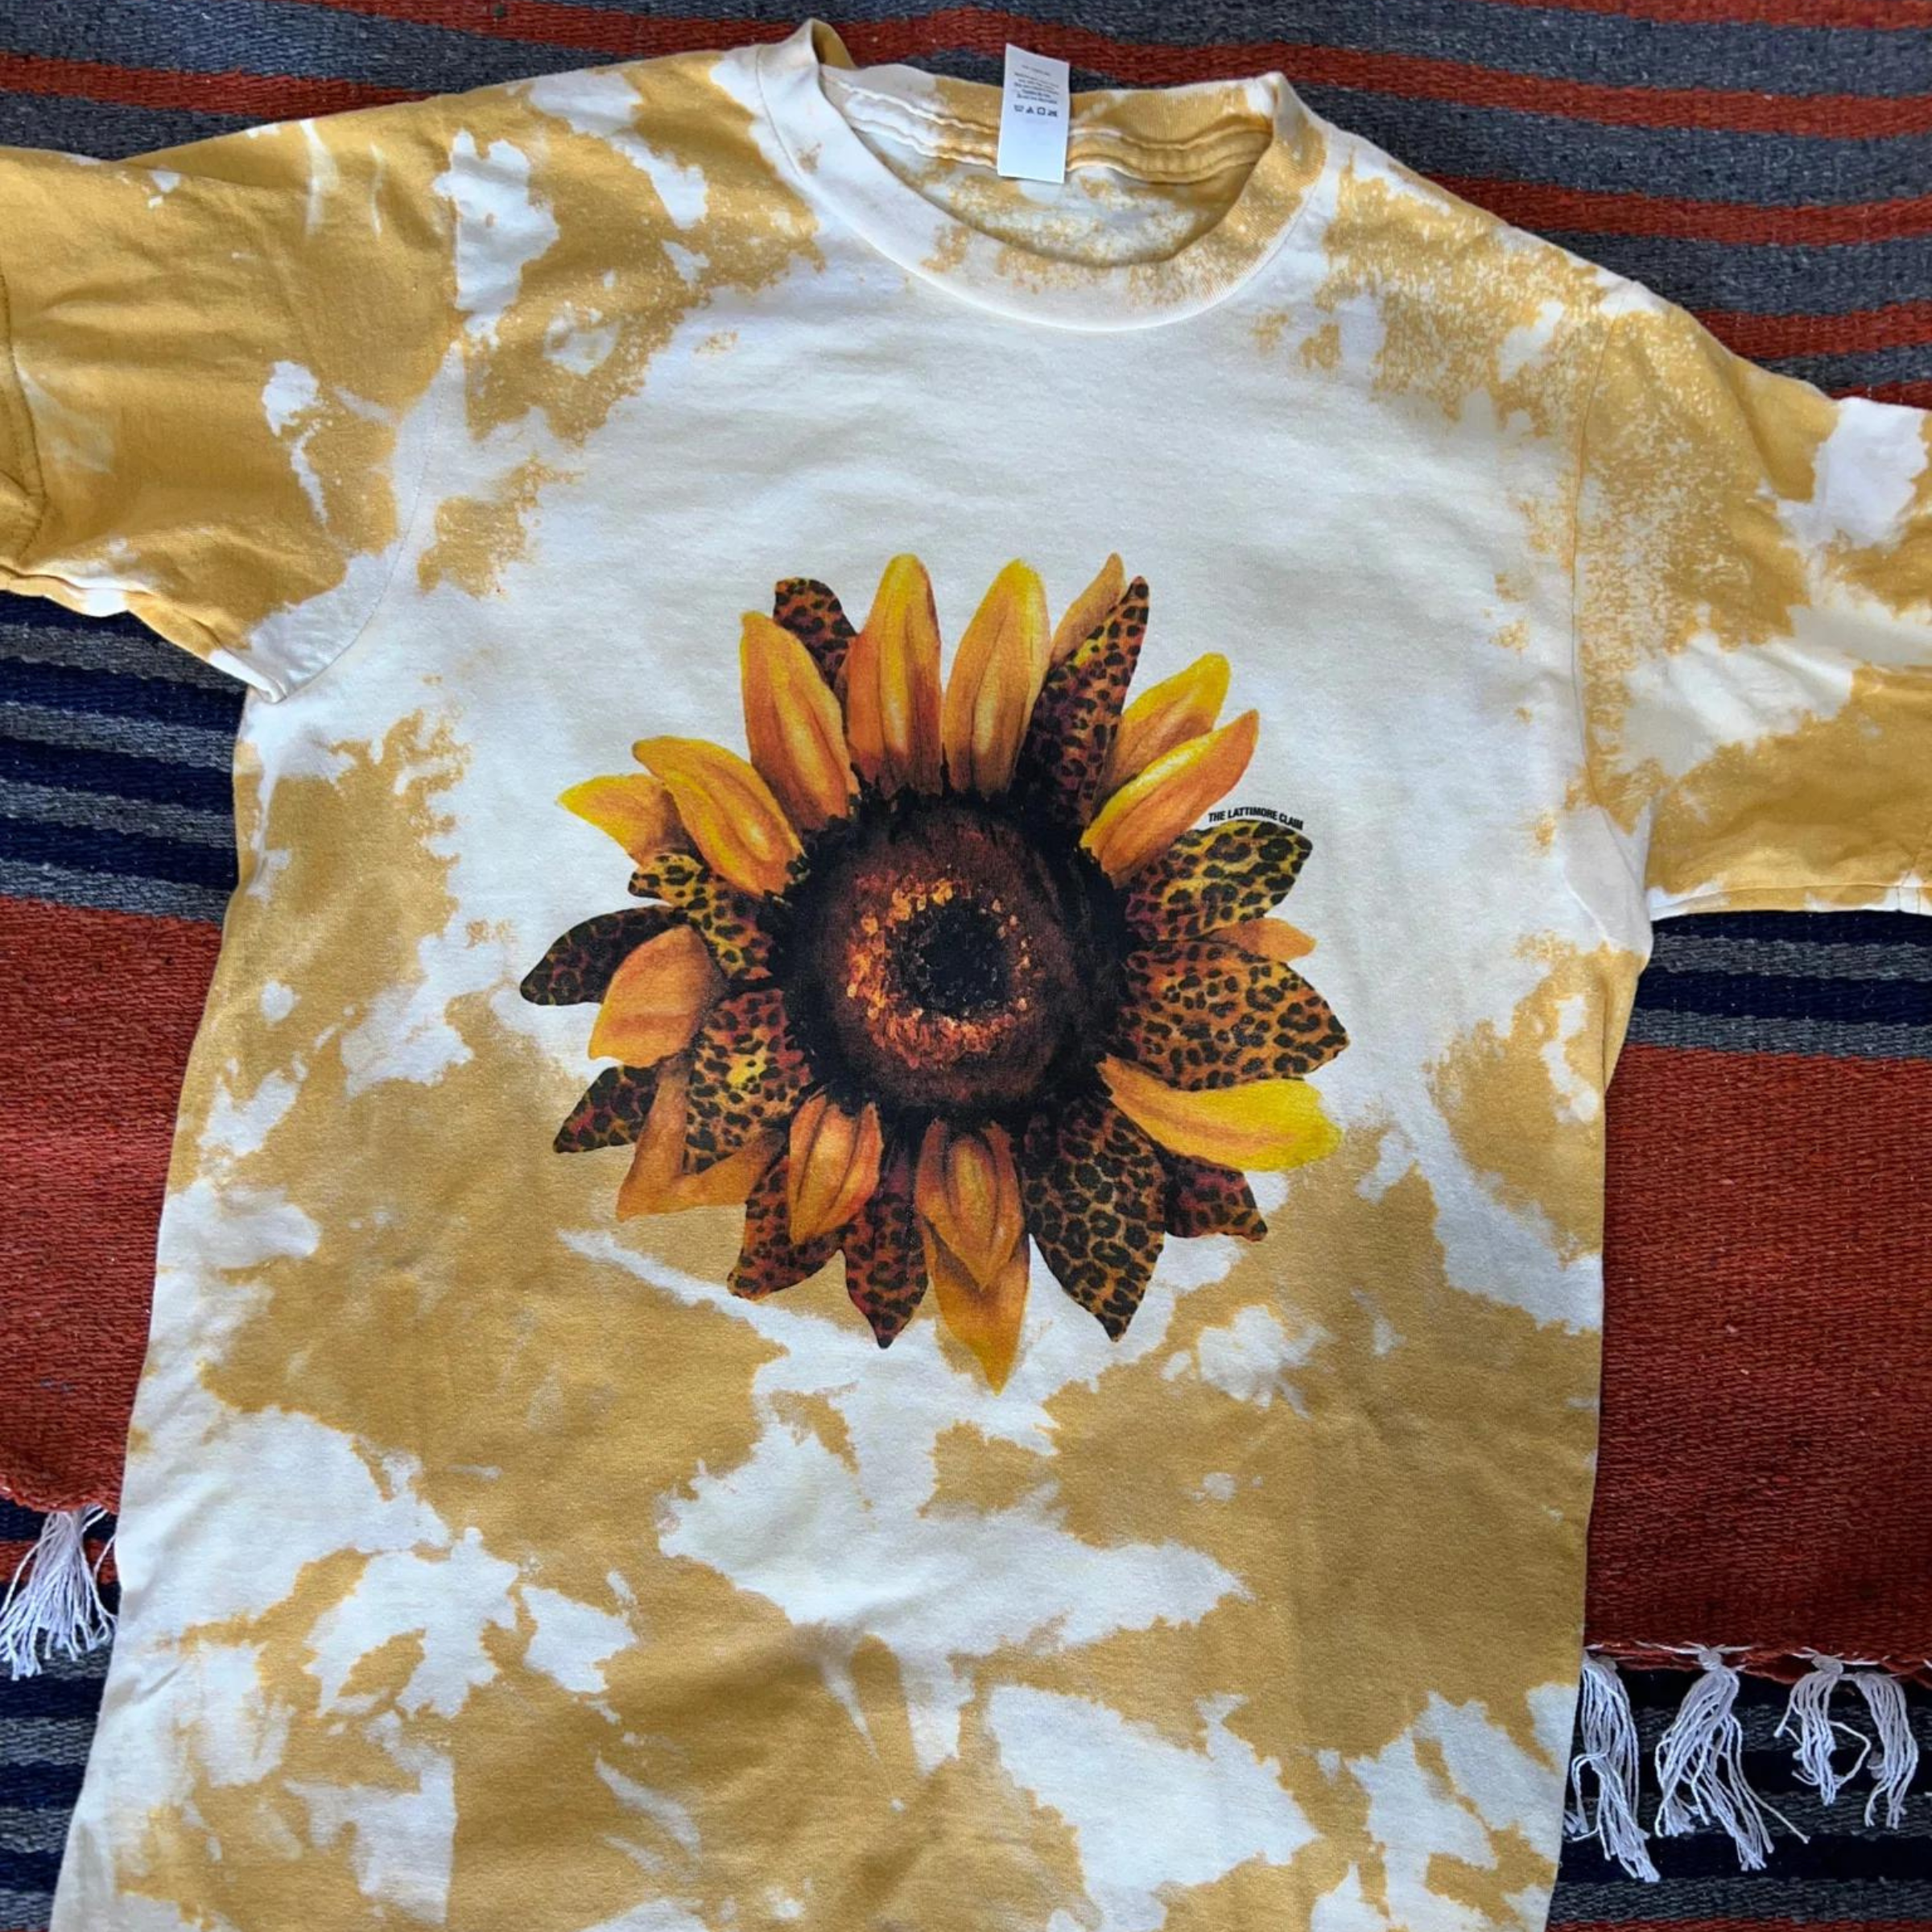 This mustard yellow bleached tee includes a crew neckline, short sleeves, and a cute graphic of a leopard sunflower. It is pictured as a flatlay on a red. gray, and black striped serape blanket background. 